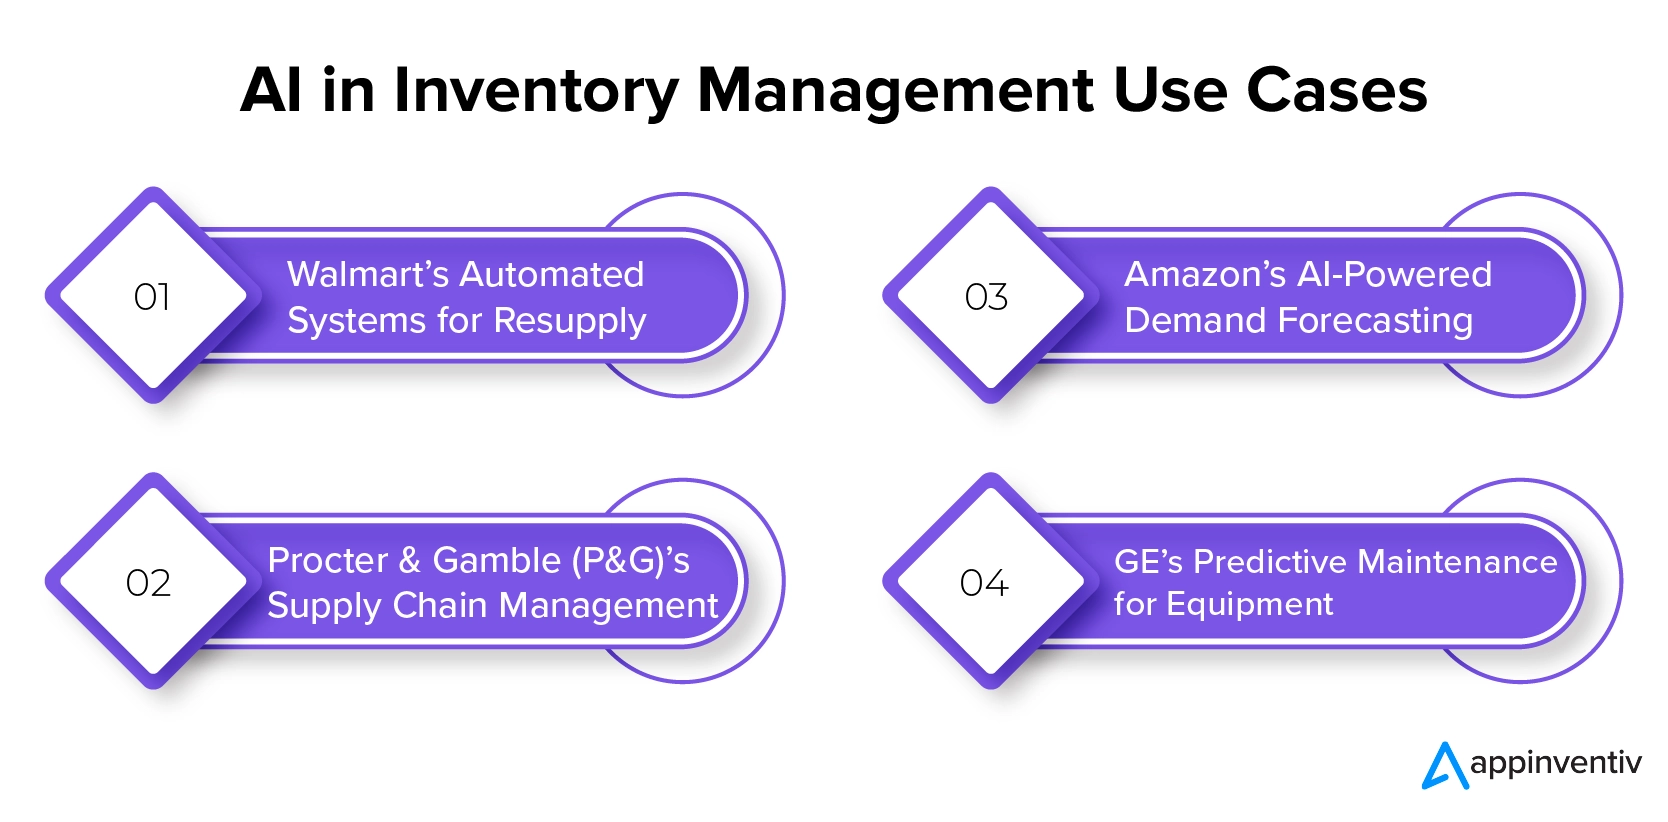 Use Cases of AI in Inventory Management Systems